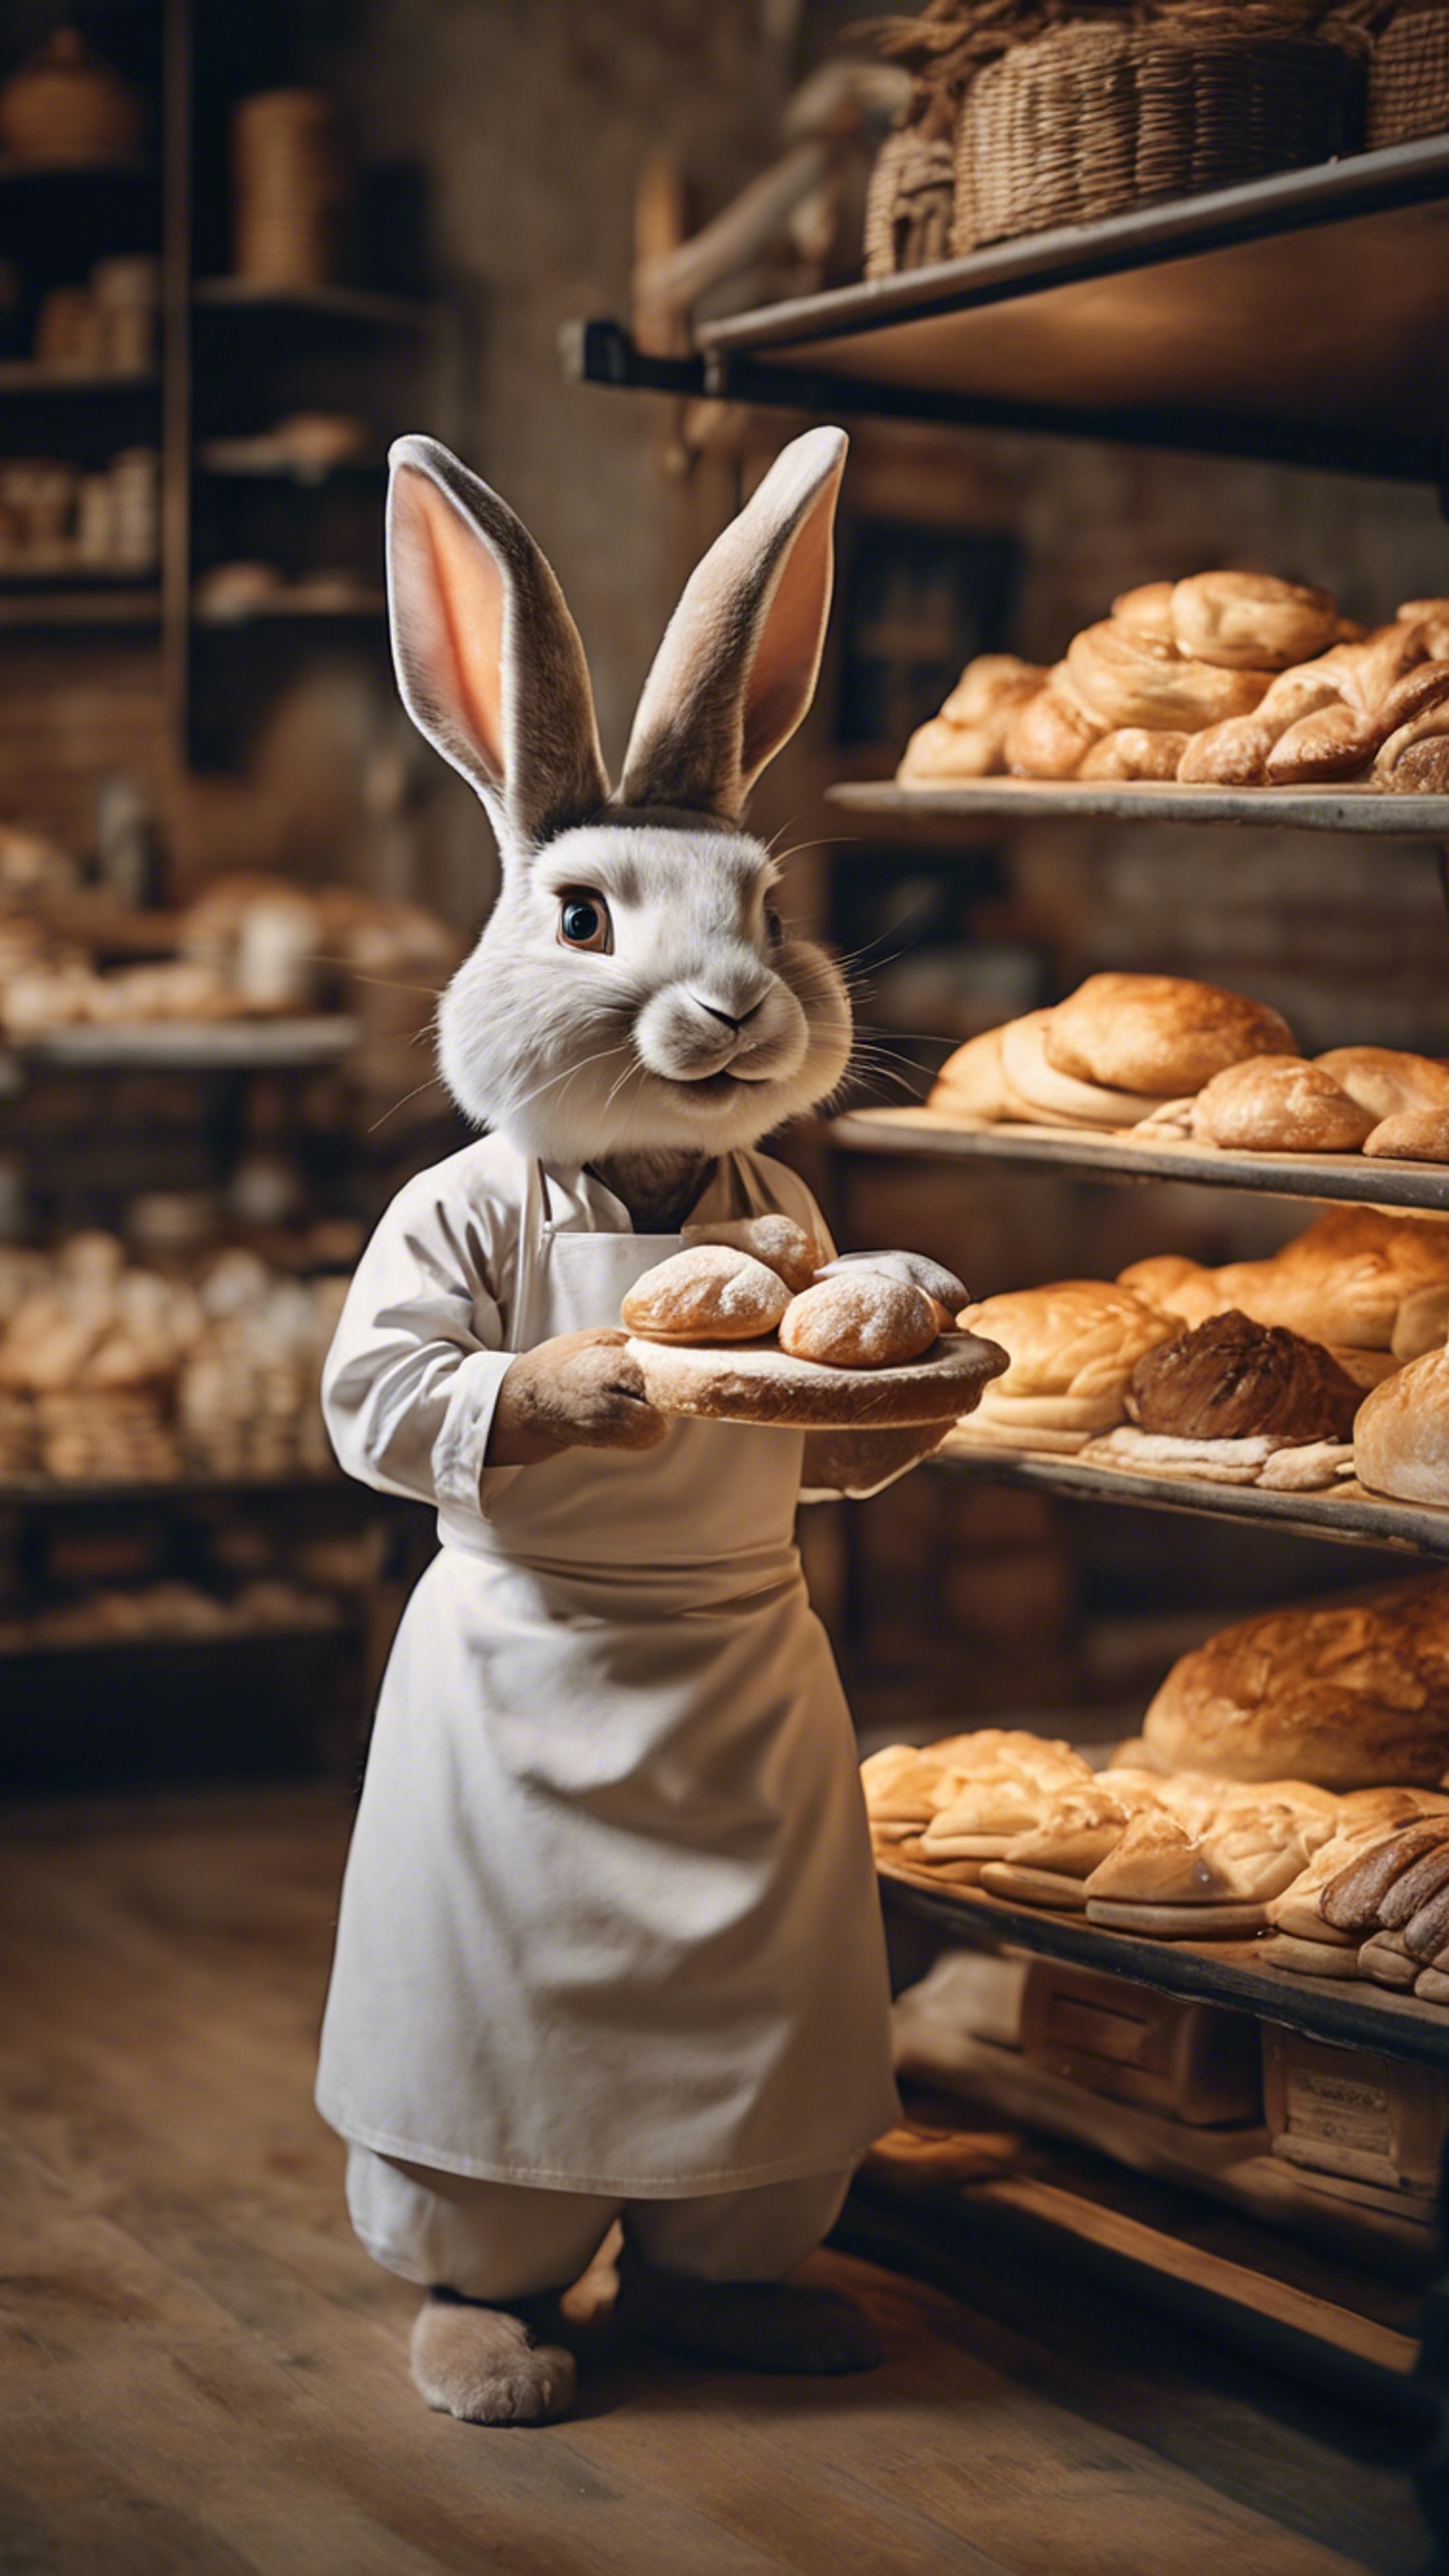 A rabbit baker displaying freshly-baked goods in a charming bakery. Papel de parede[908b61b6762c4c248f7e]